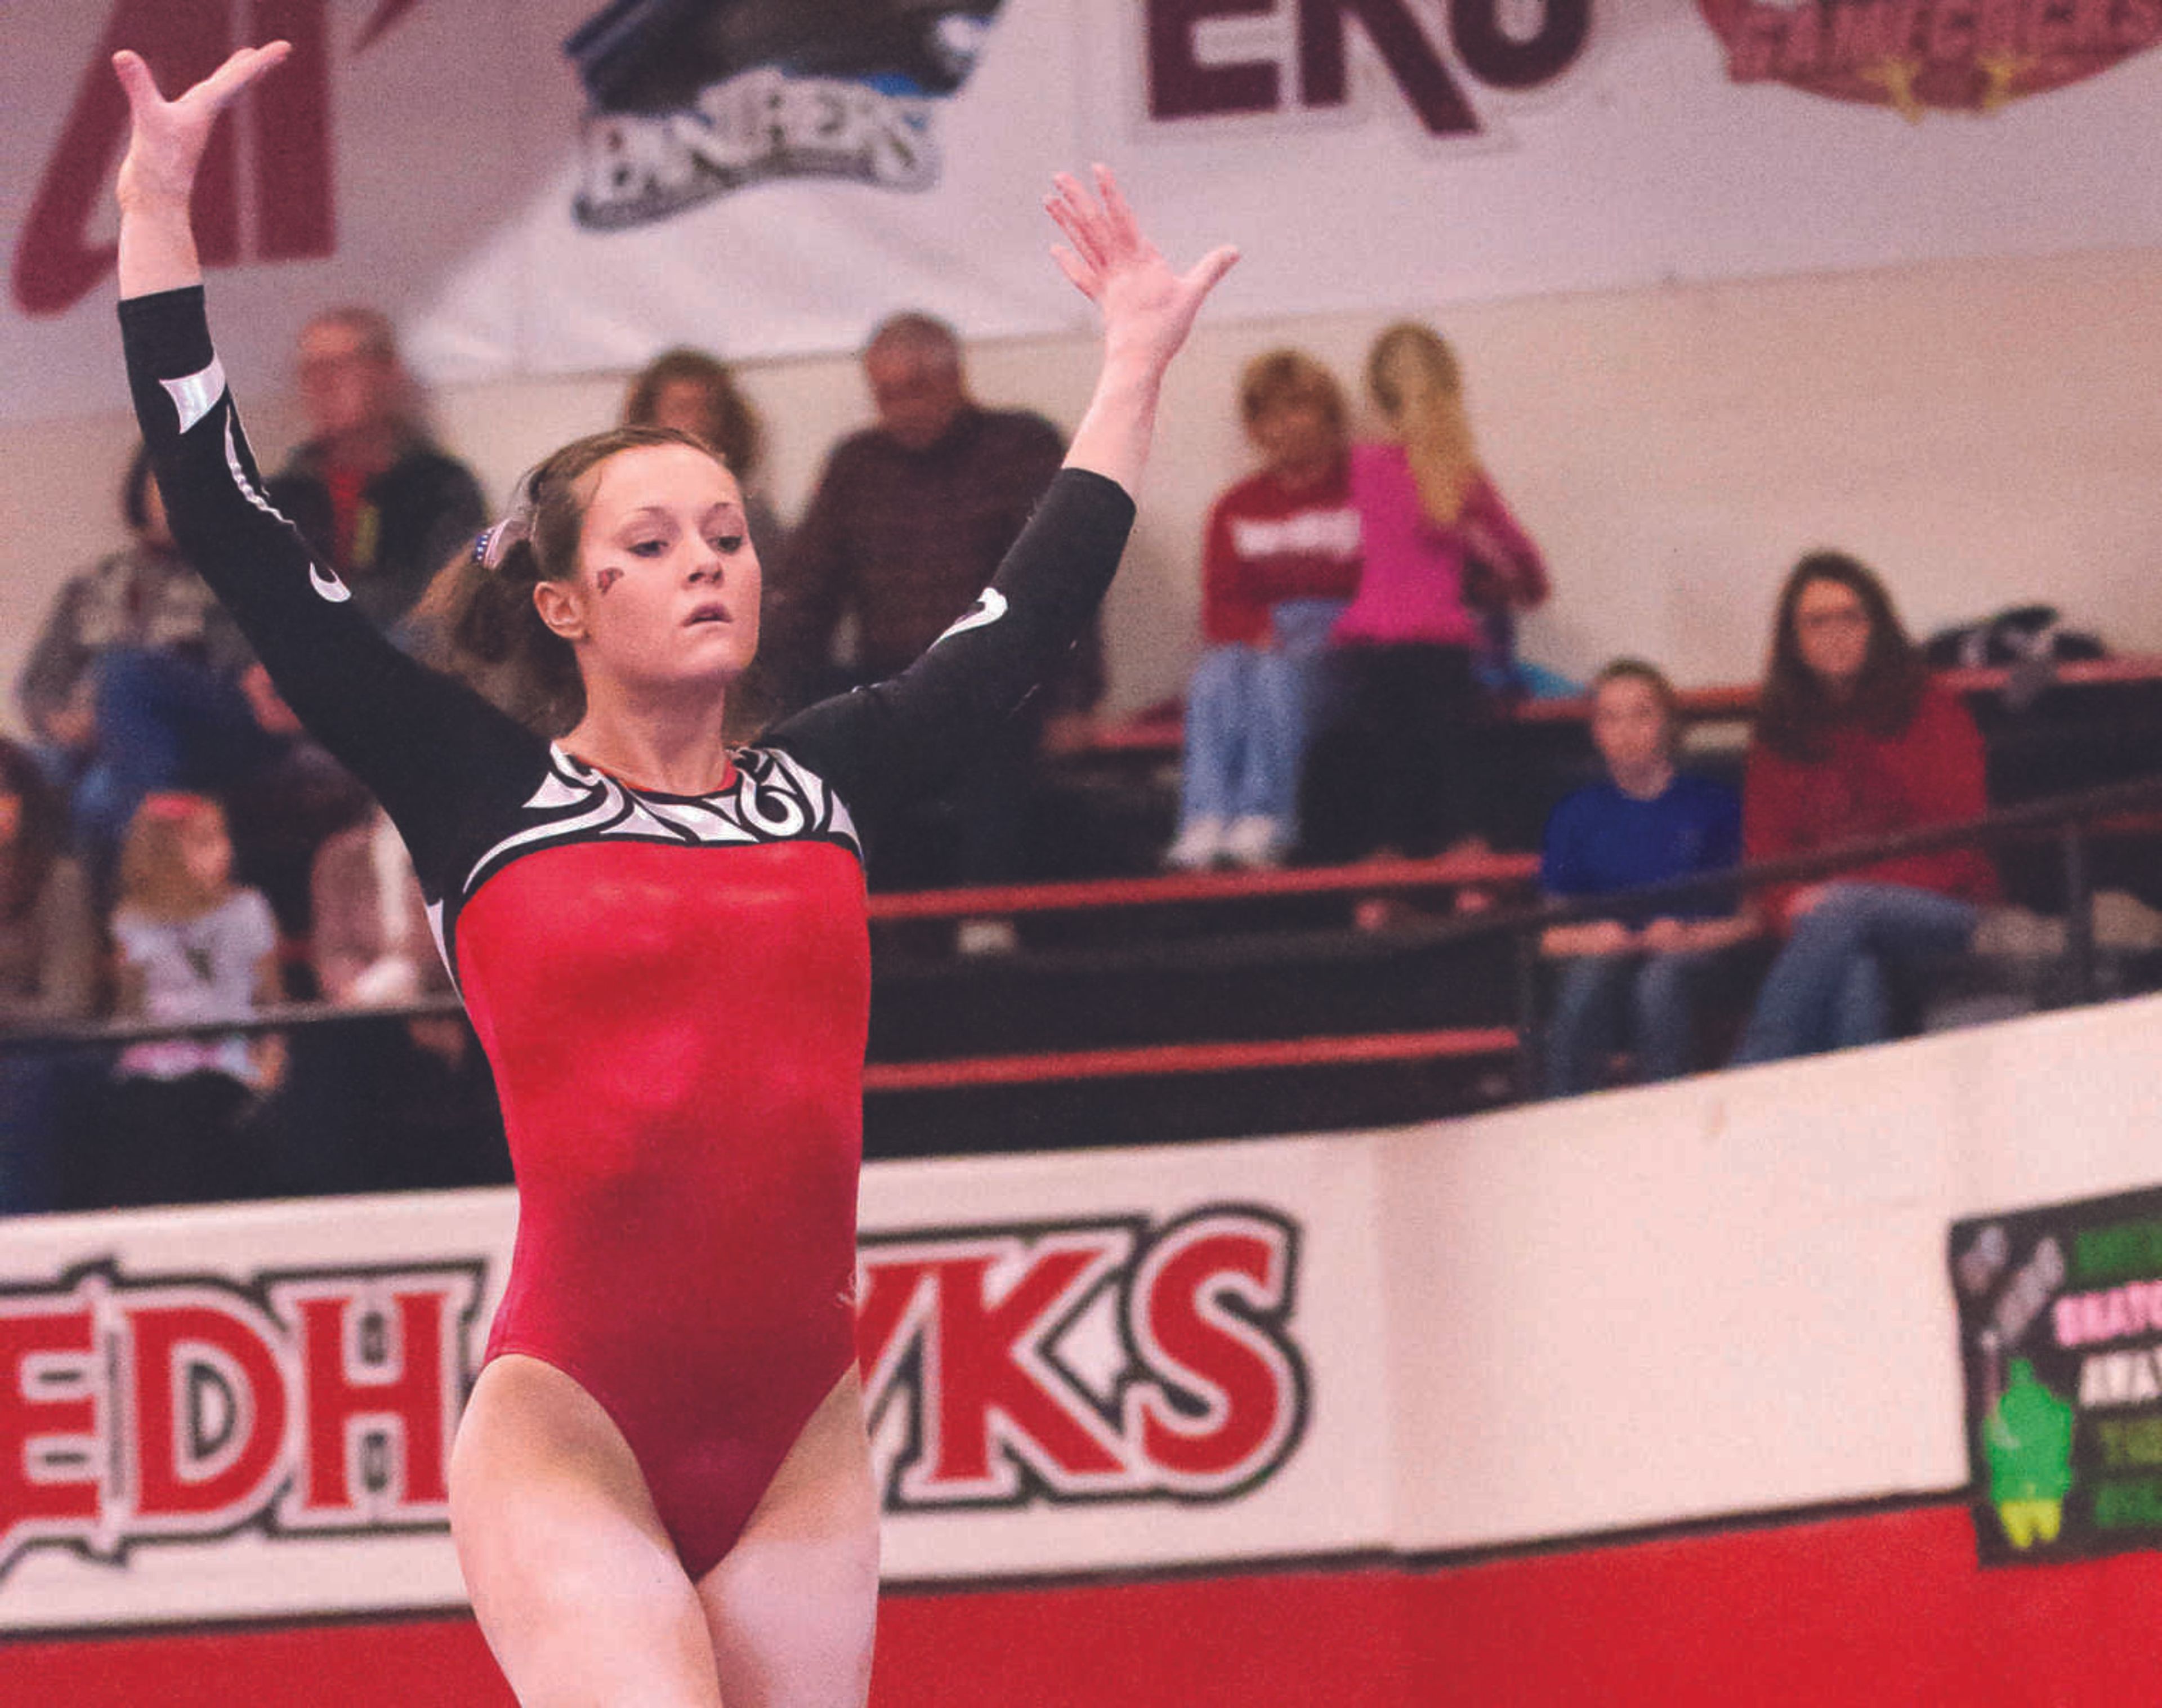 Southeast gymnast has success after foot injury